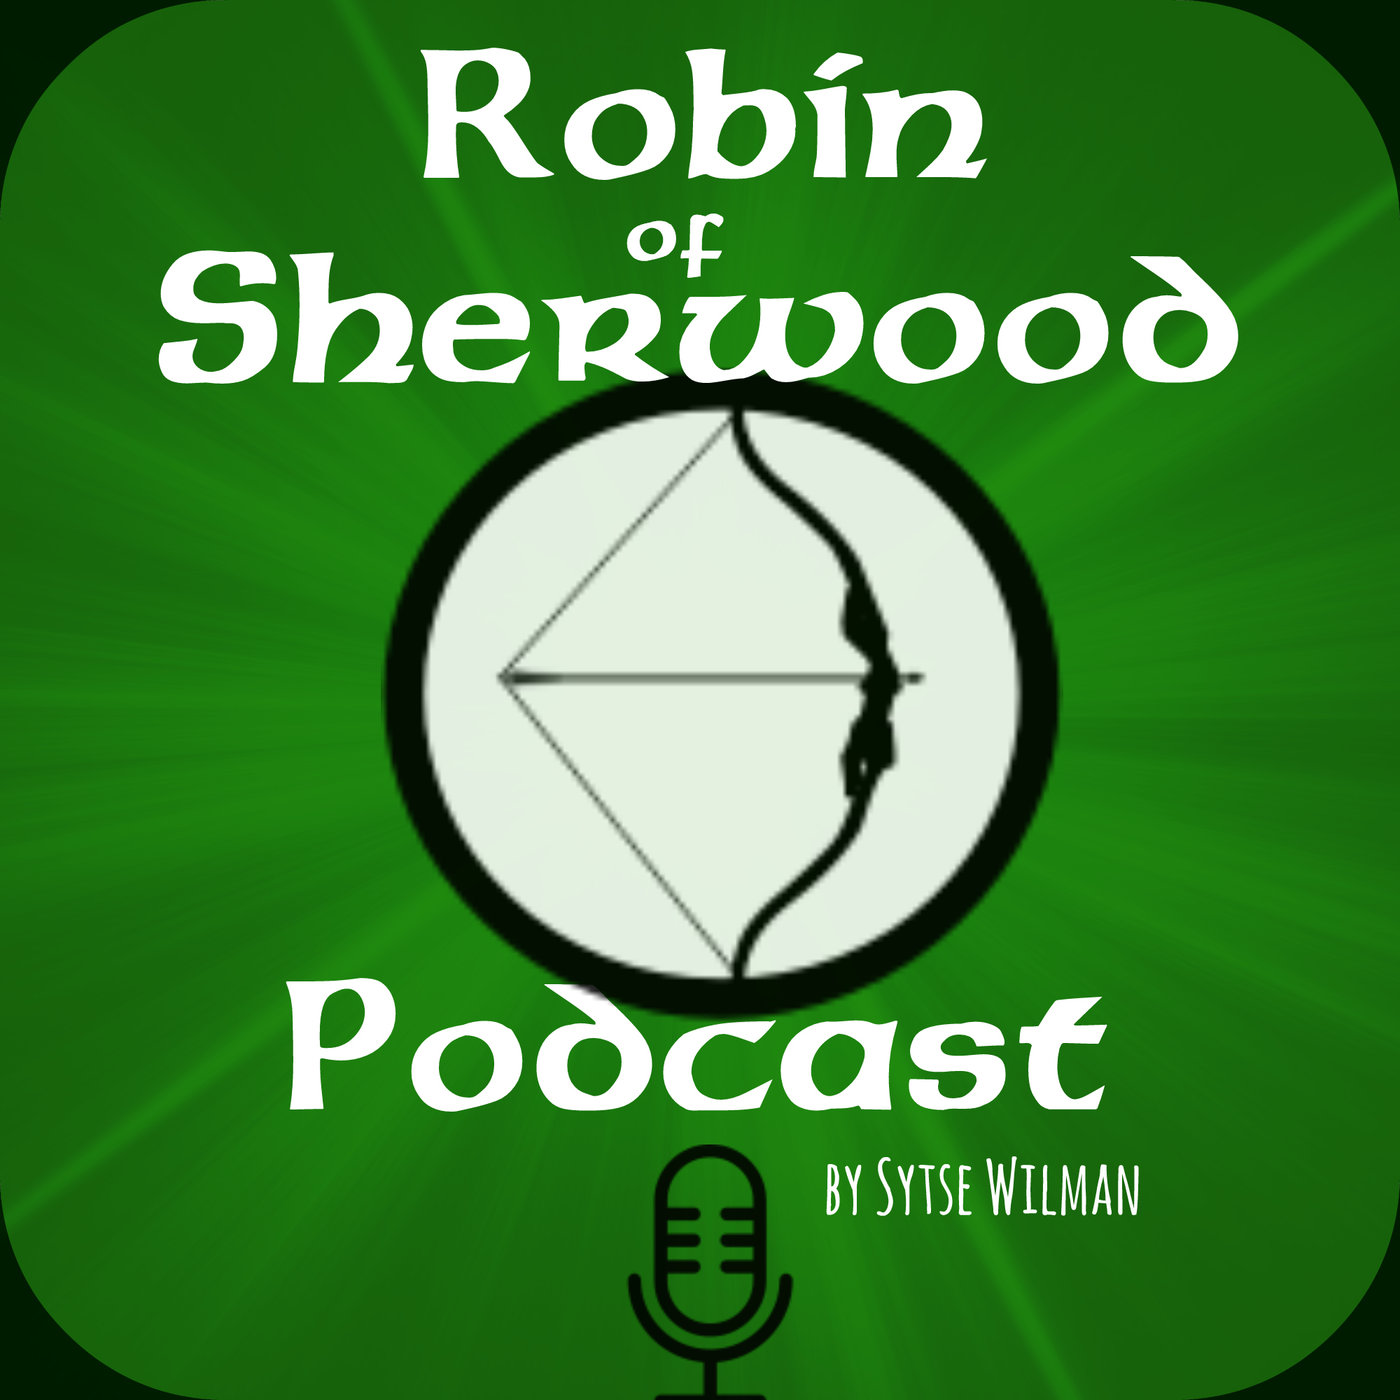 Robin of Sherwood Podcast bonus episode 2: an interview with Phil Rose